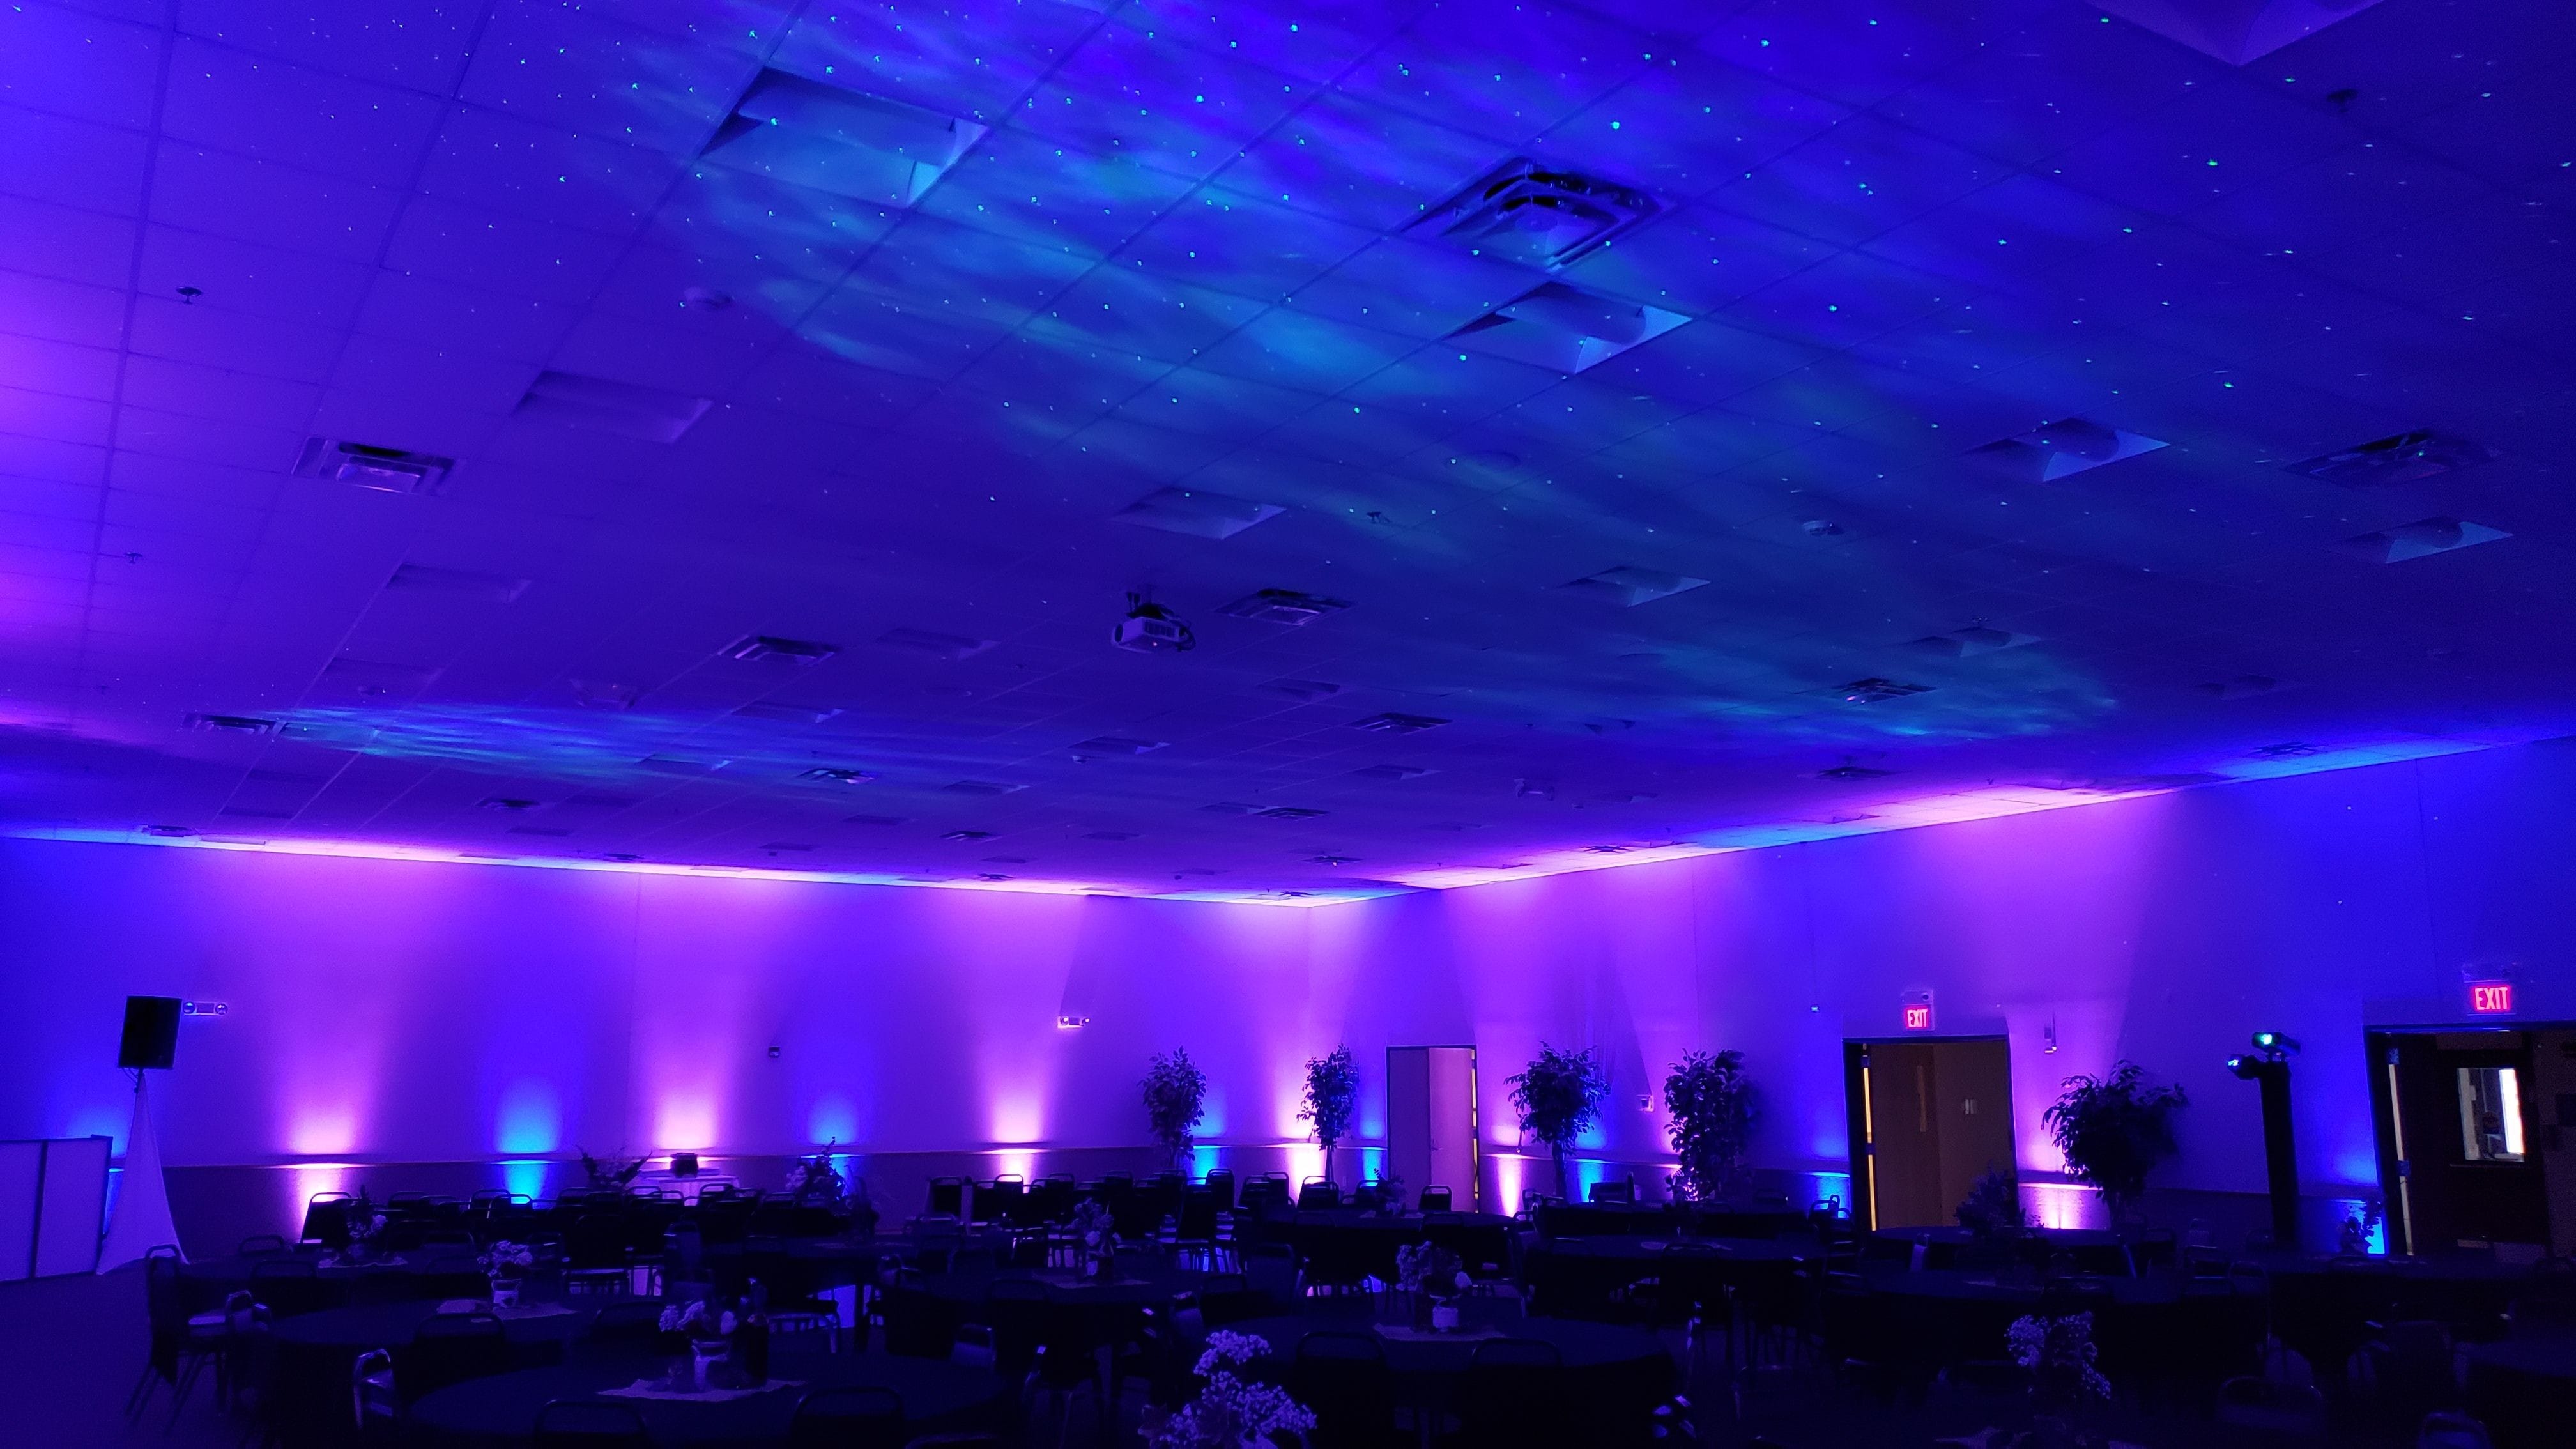 Wedding lighting at the AAD Shrine by Duluth Event lighting.Up lighting in lavender and blue with northern lights on the ceiling